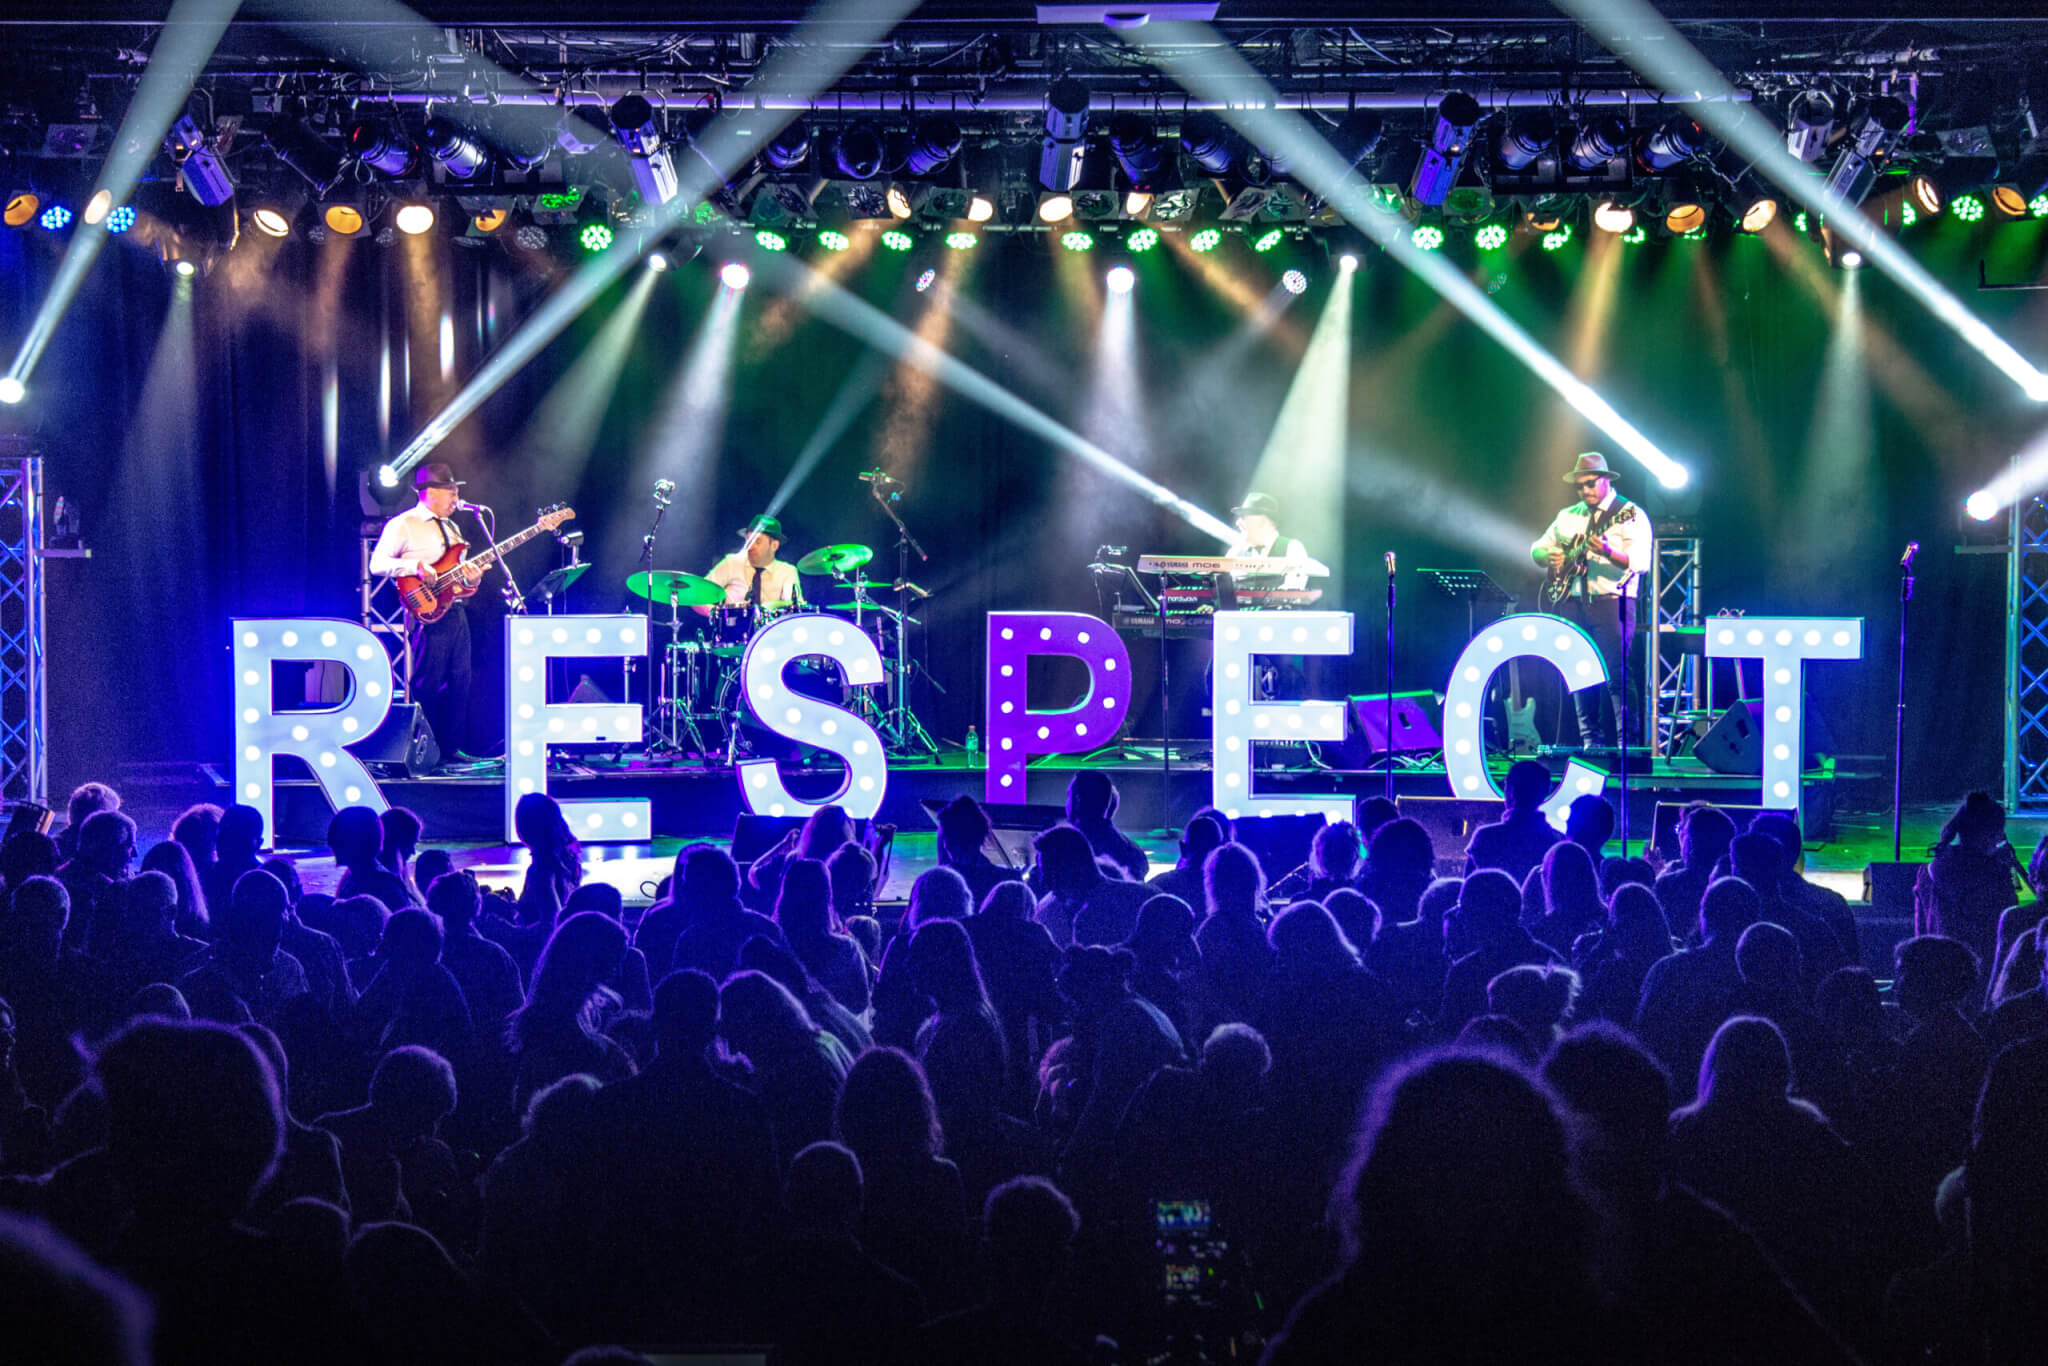 R.E.S.P.E.C.T. – A Tribute Concert Experience Like No Other!